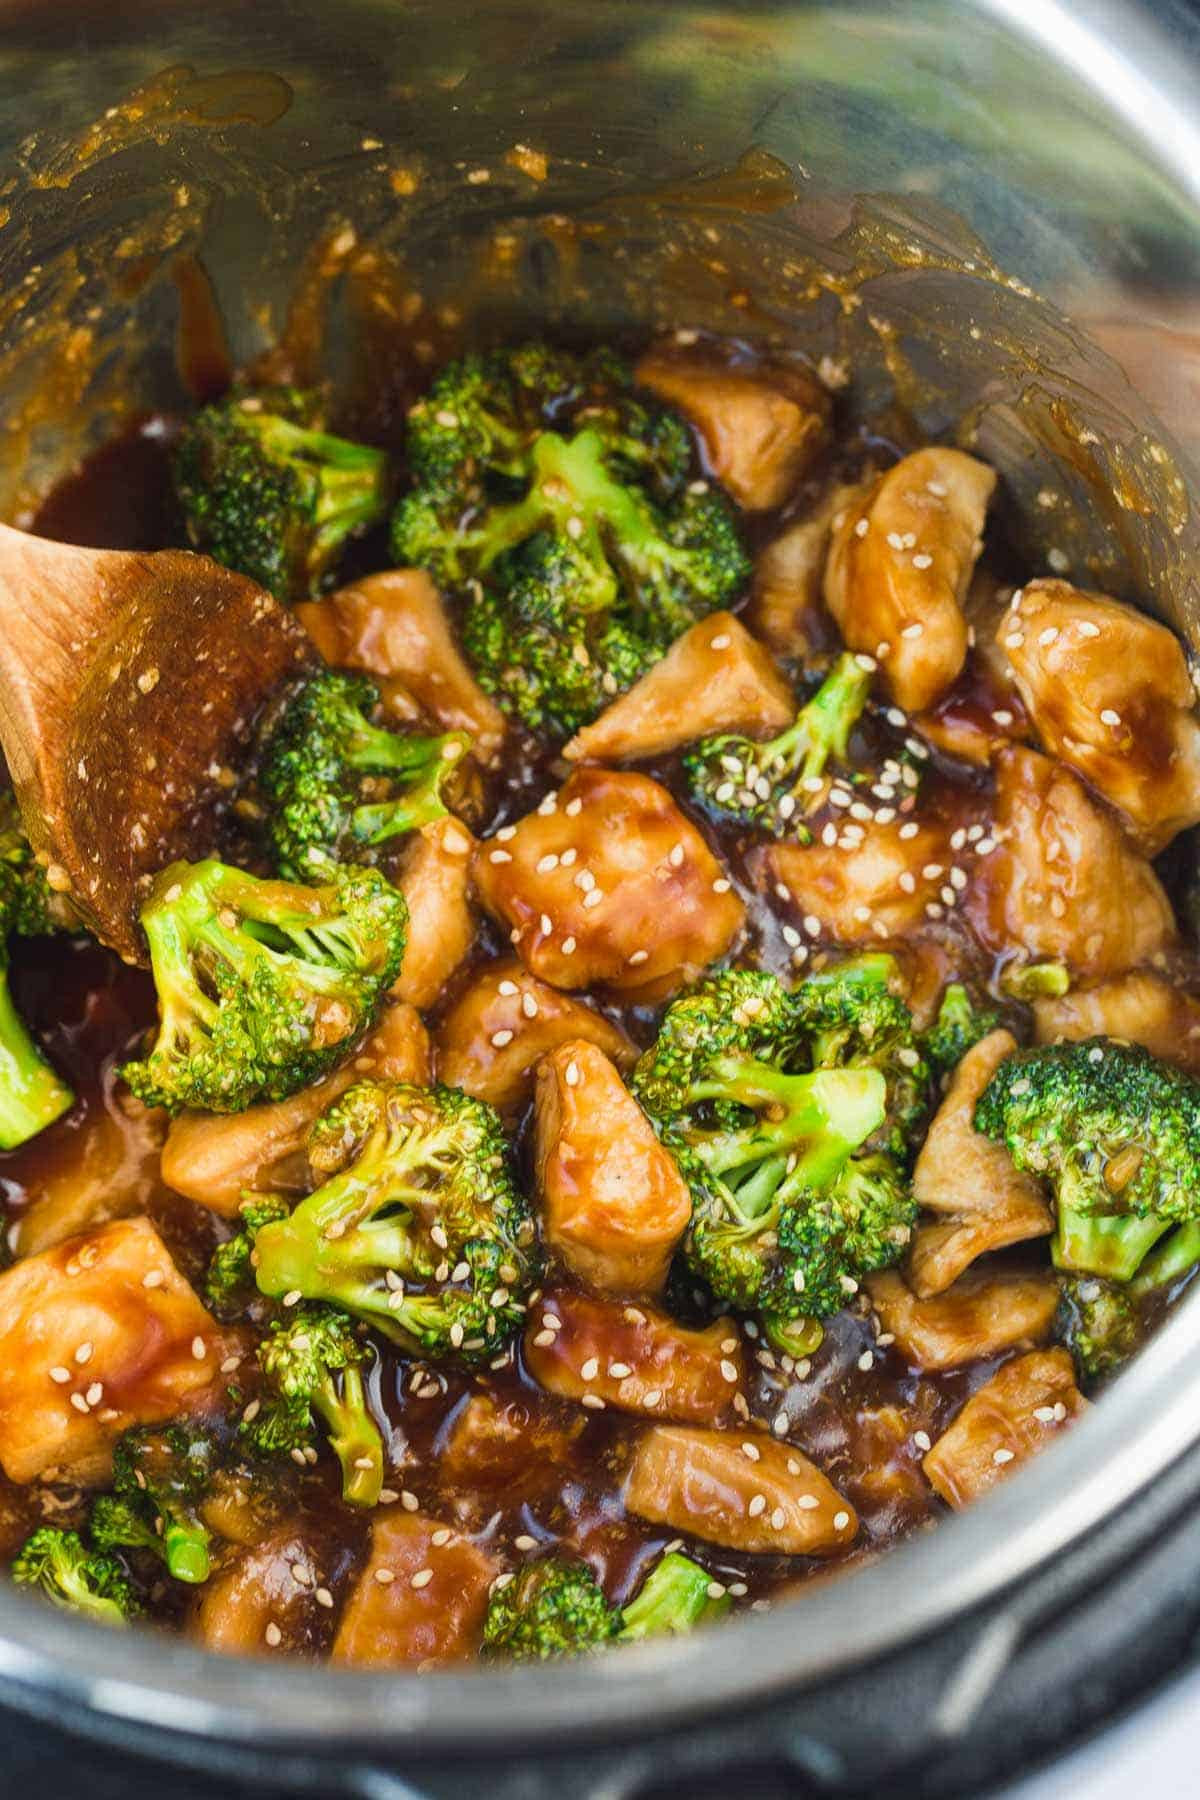 Best Chicken and Broccoli Instant Pot